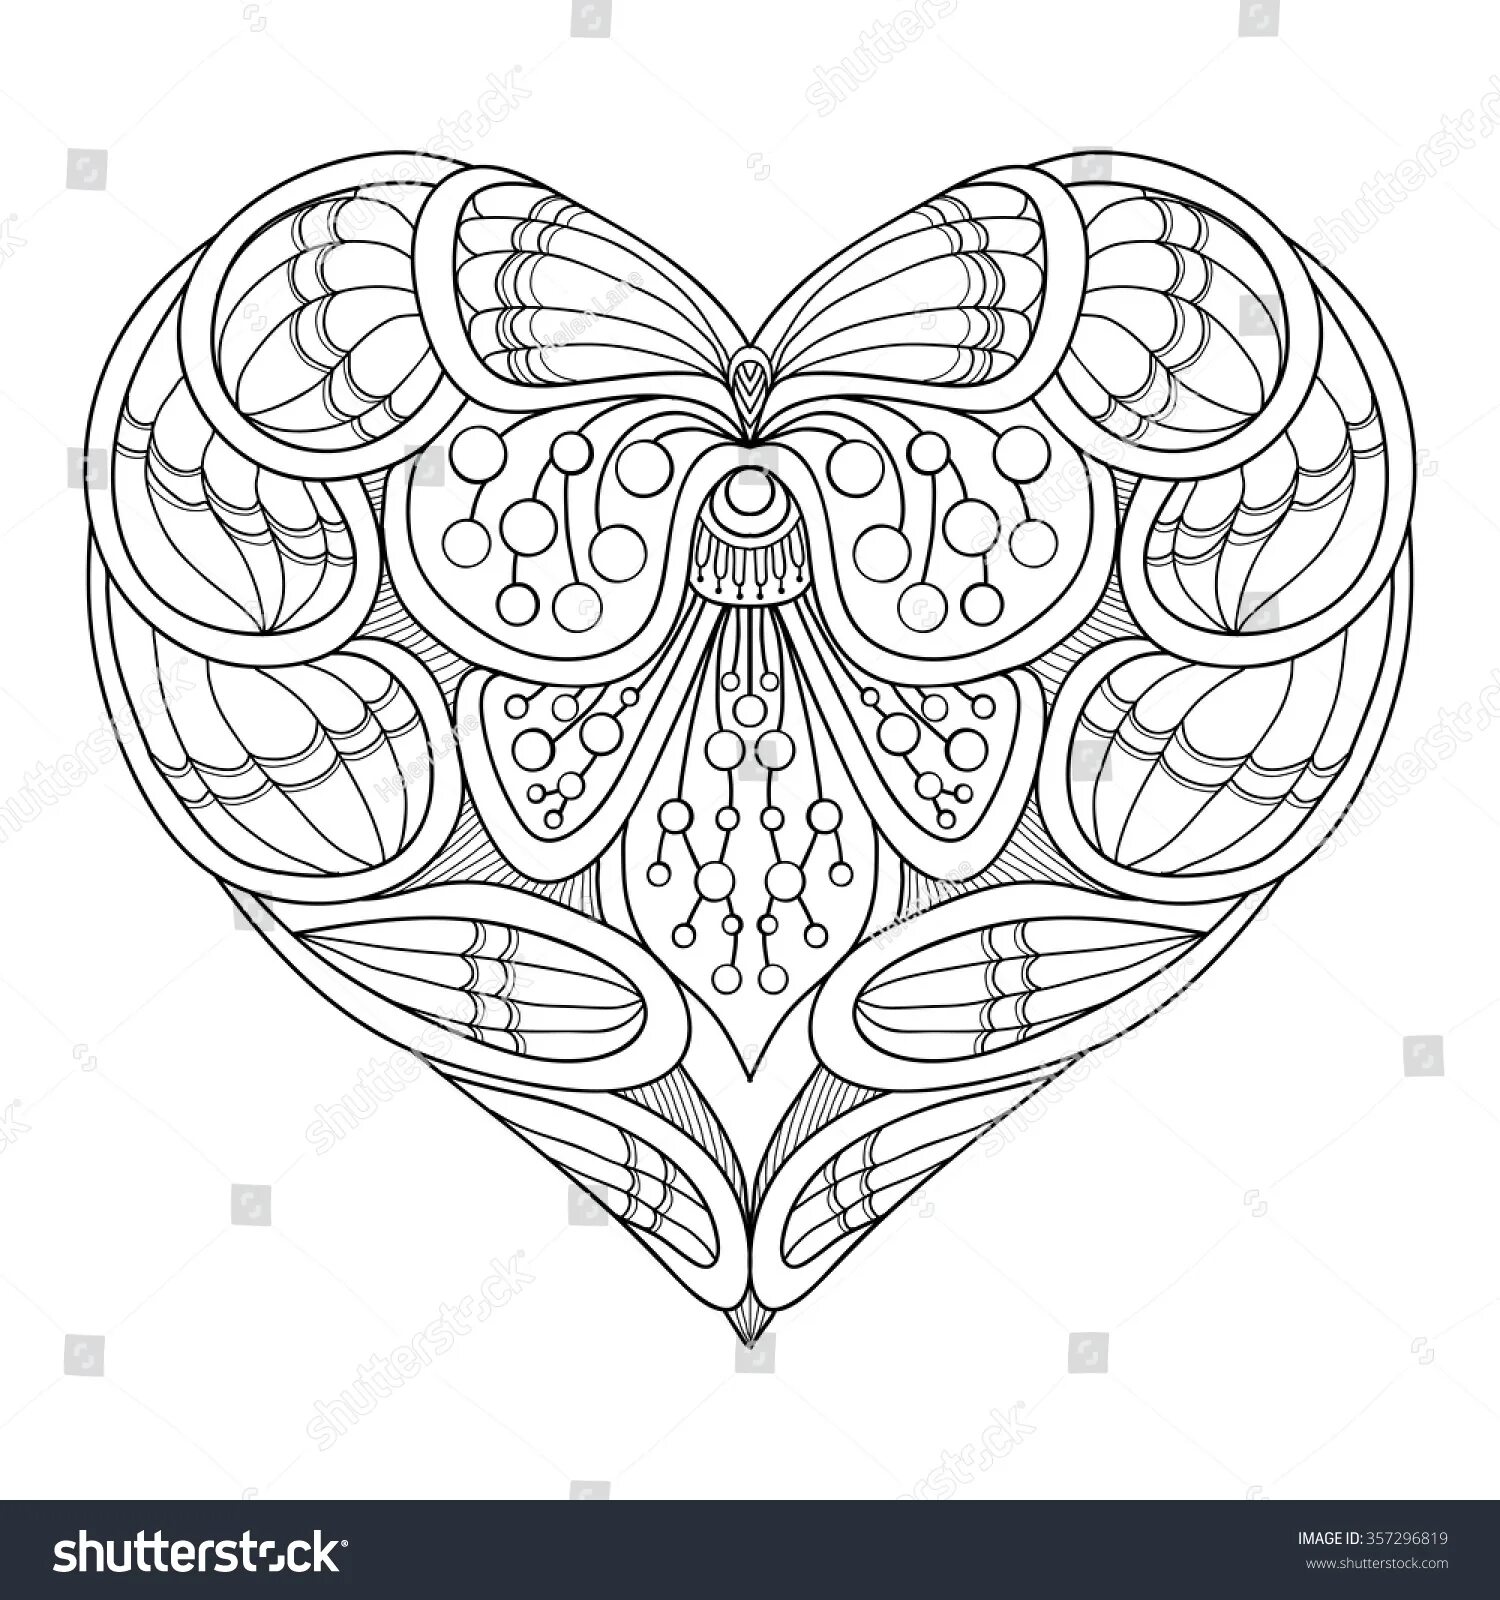 Decorated heart coloring page